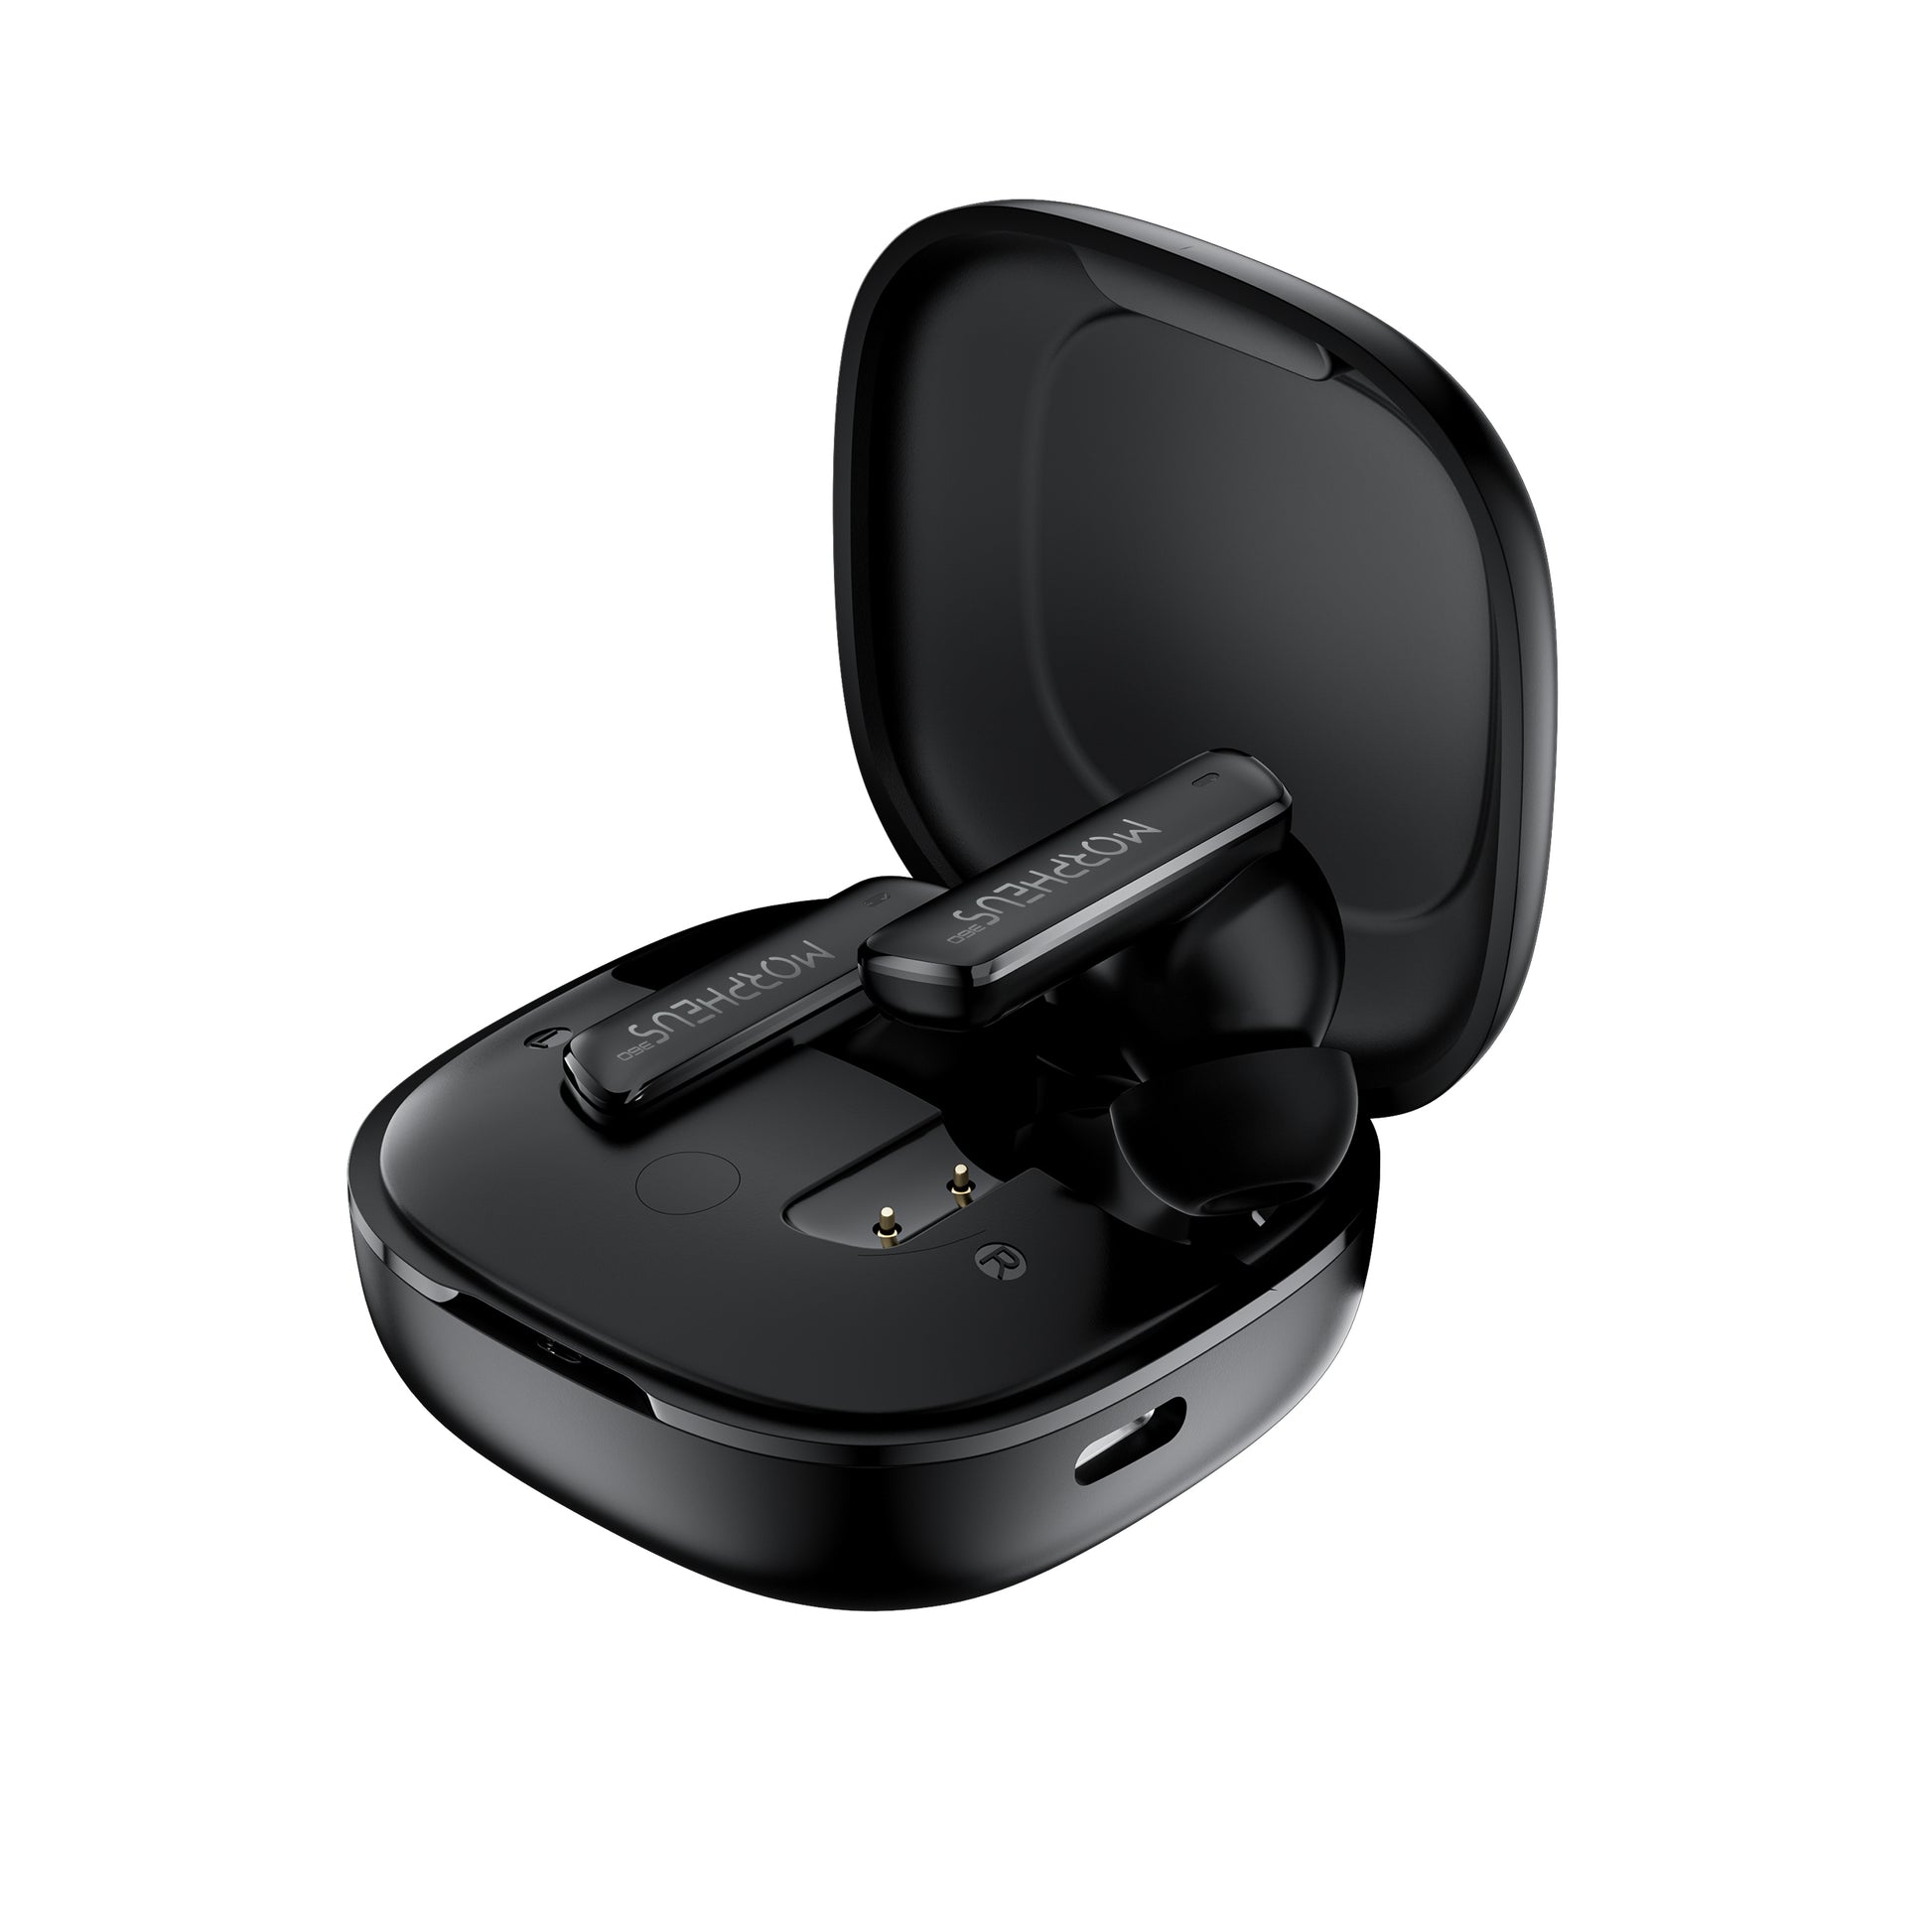 Photo of Morpheus 360 Pulse ANC Hybrid ANC True Wireless Earbuds, front view with charging case open, the right black stick earbud is lifted from the charging case while the left earbud is resting in charging case